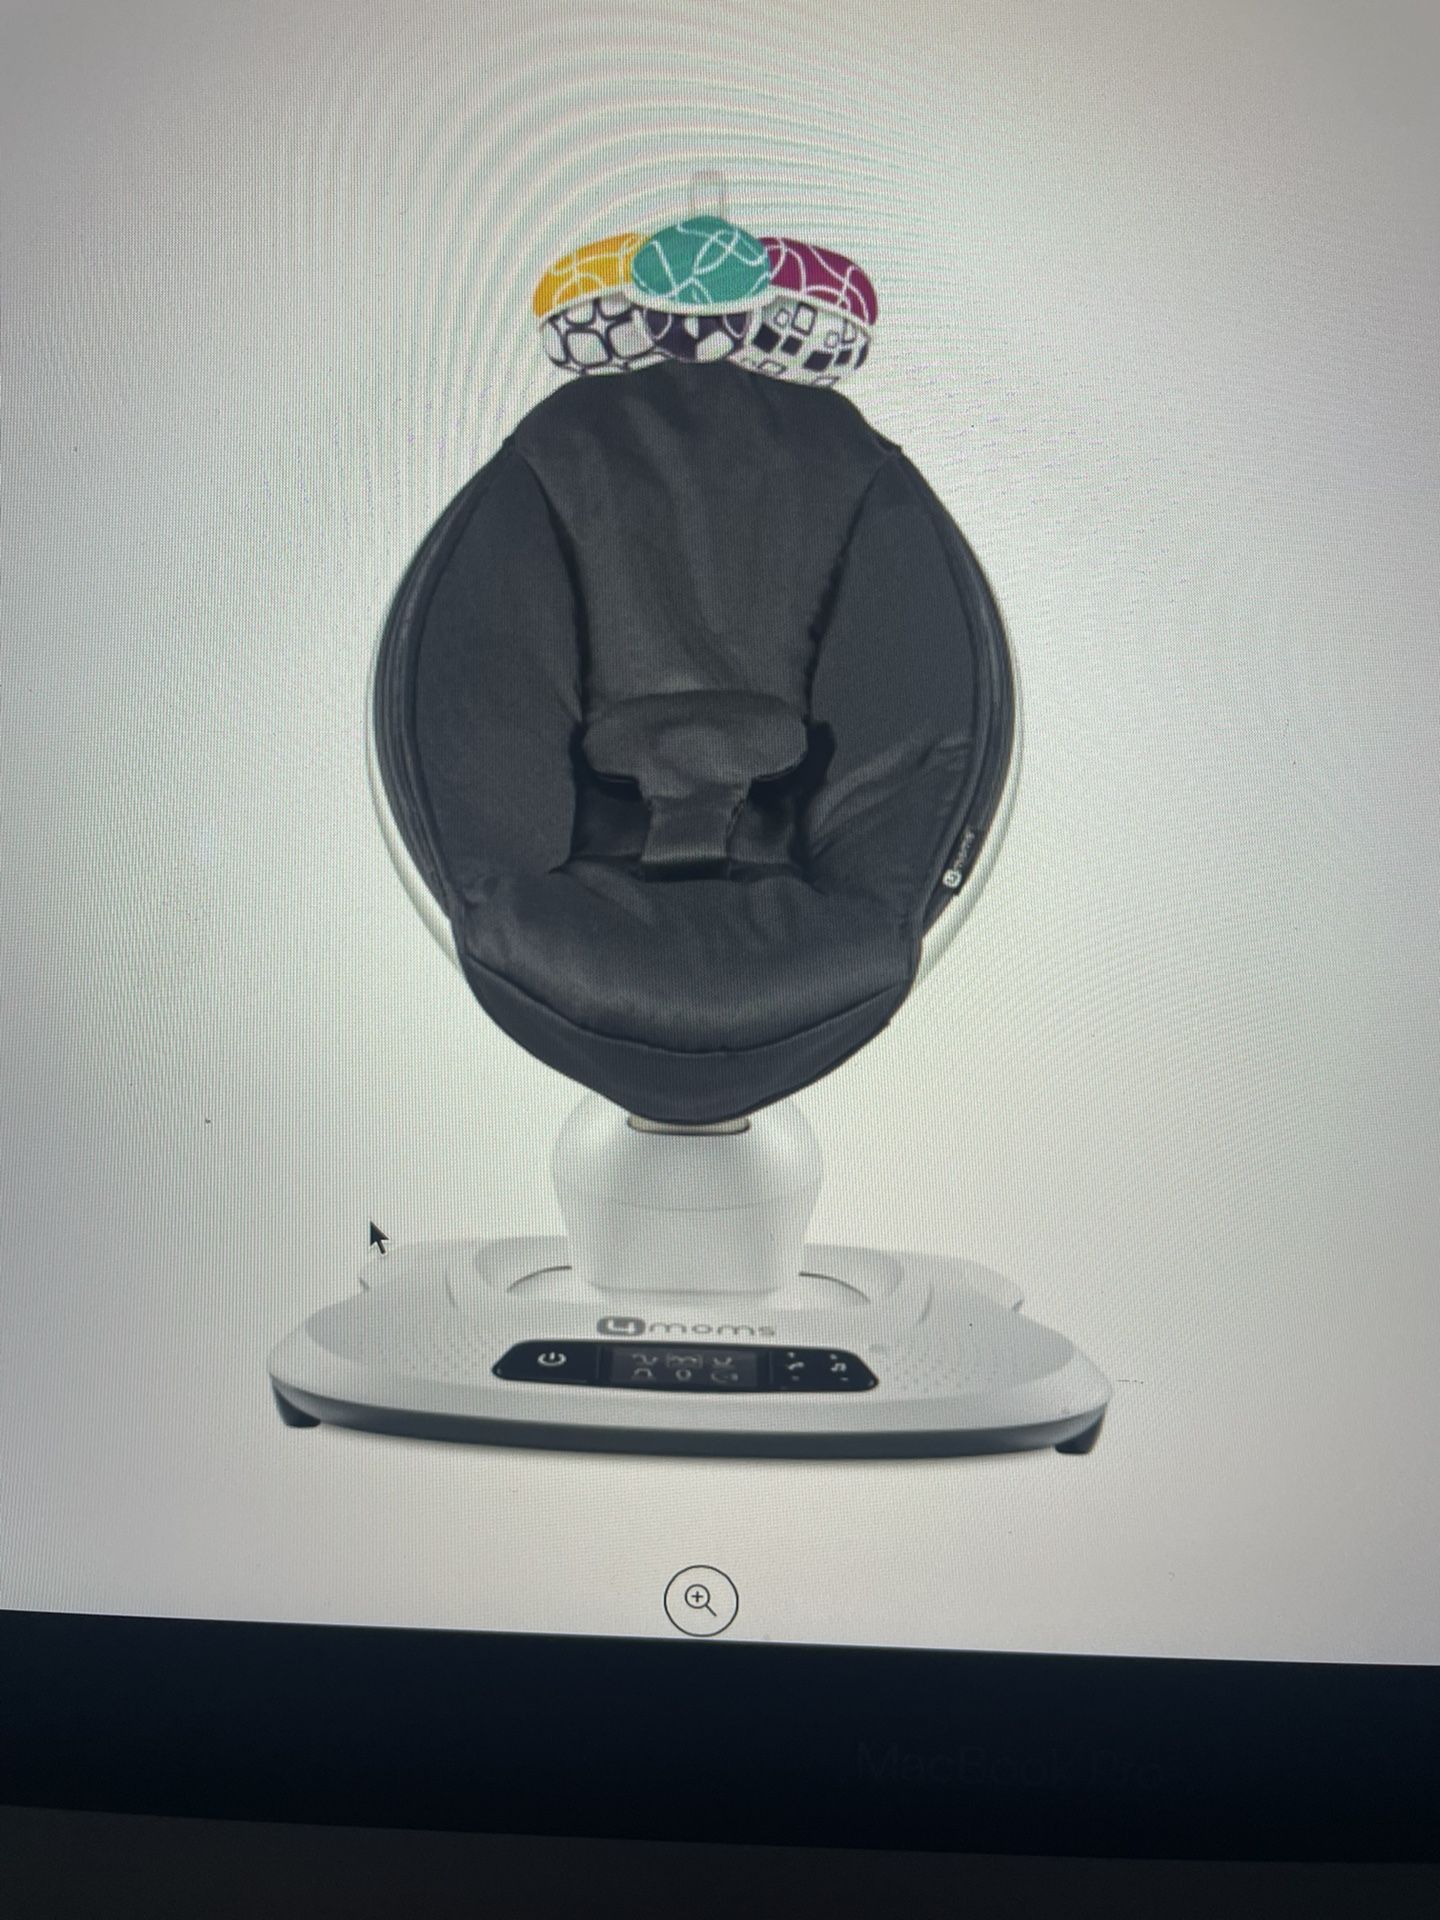 4 moms mamaRoo 4 Baby Swing, Bluetooth Baby Rocker With 5 Unique Motions 